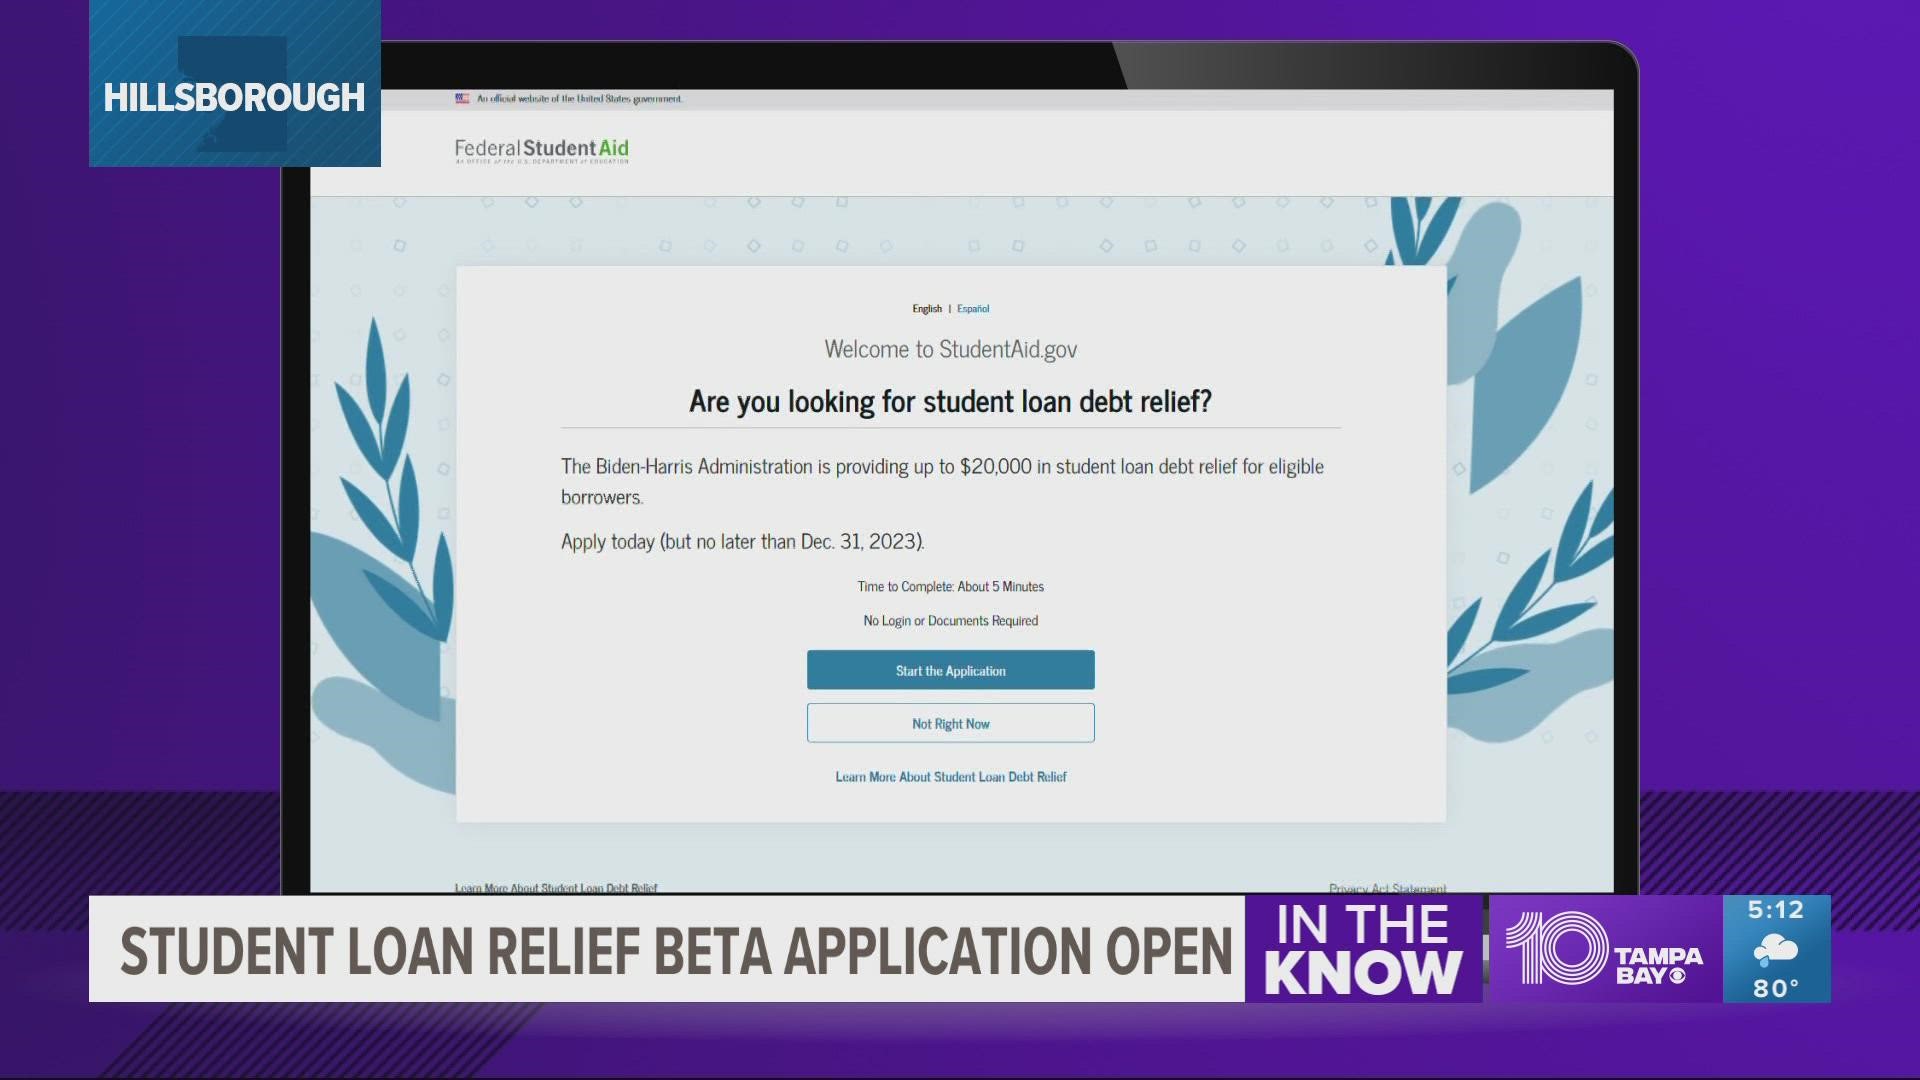 The online application form for widespread student debt relief is now open. Borrowers have until Dec. 31, 2023 to fill it out.